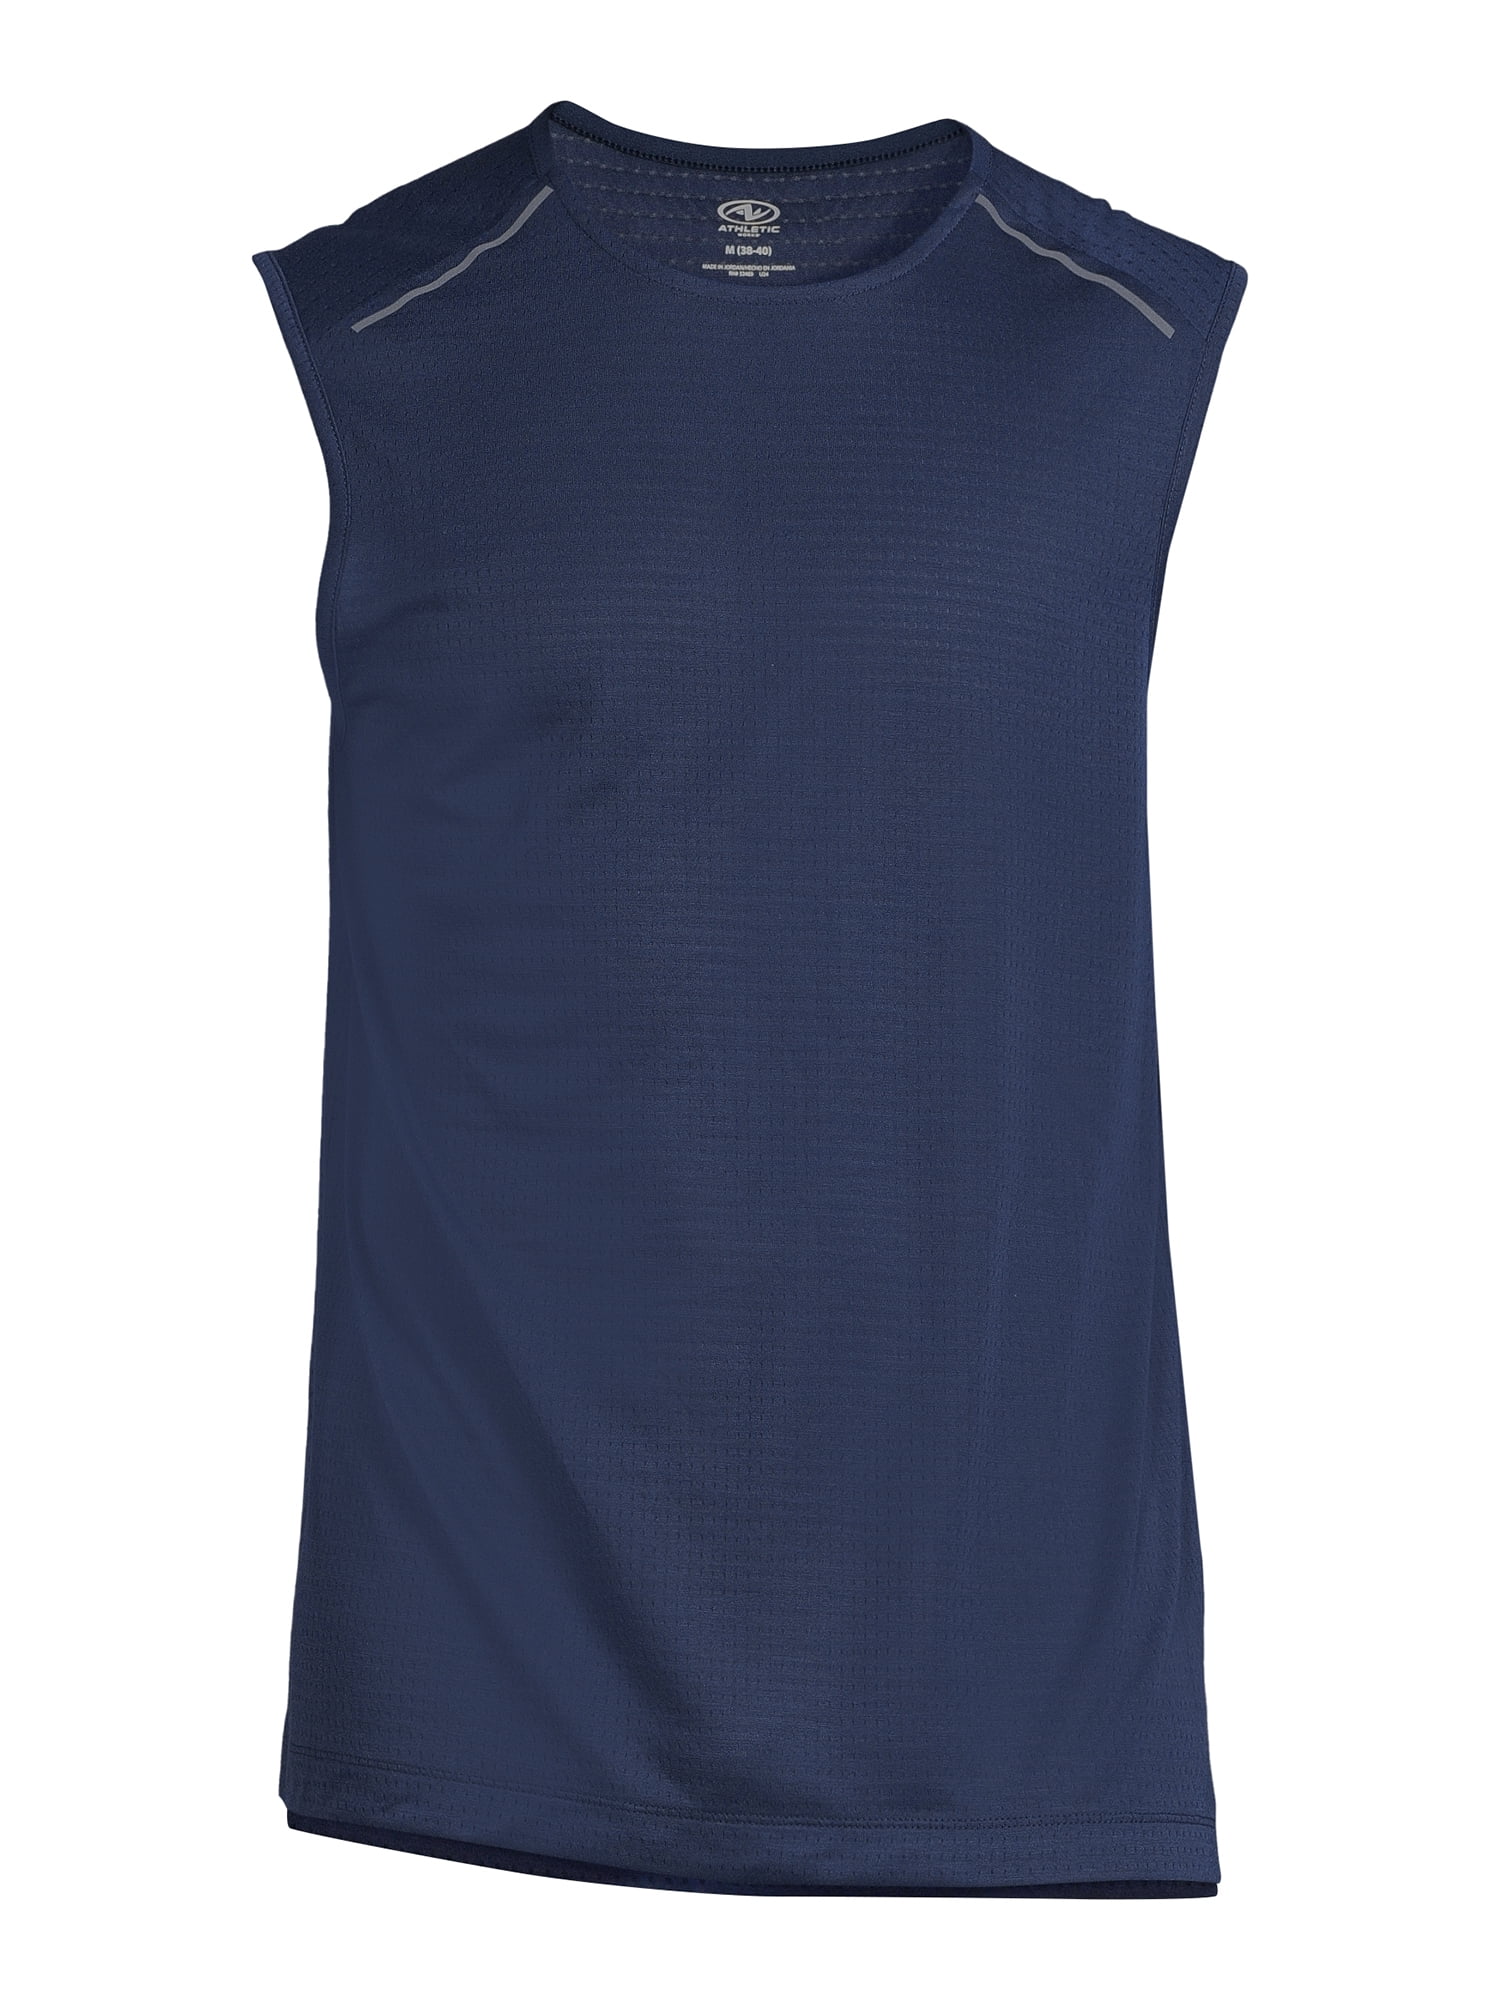 Athletic Works Men's Performance Sleeveless Muscle Tee, Sizes S-3XL 